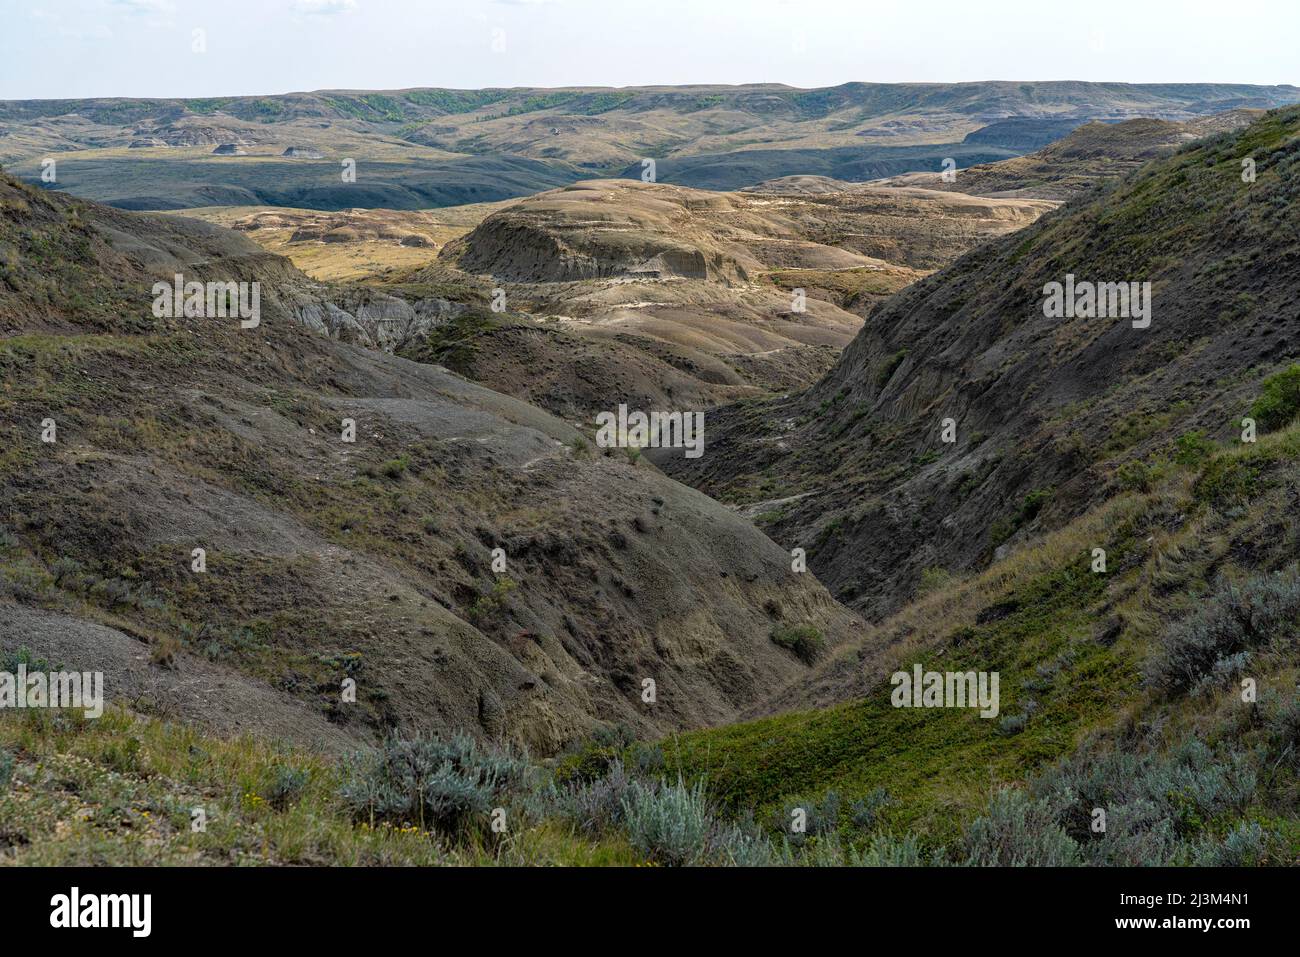 Valley of 1000 Devils in the East Block of Grasslands National Park, which features amazing displays of erosion and geology; Saskatchewan, Canada Stock Photo